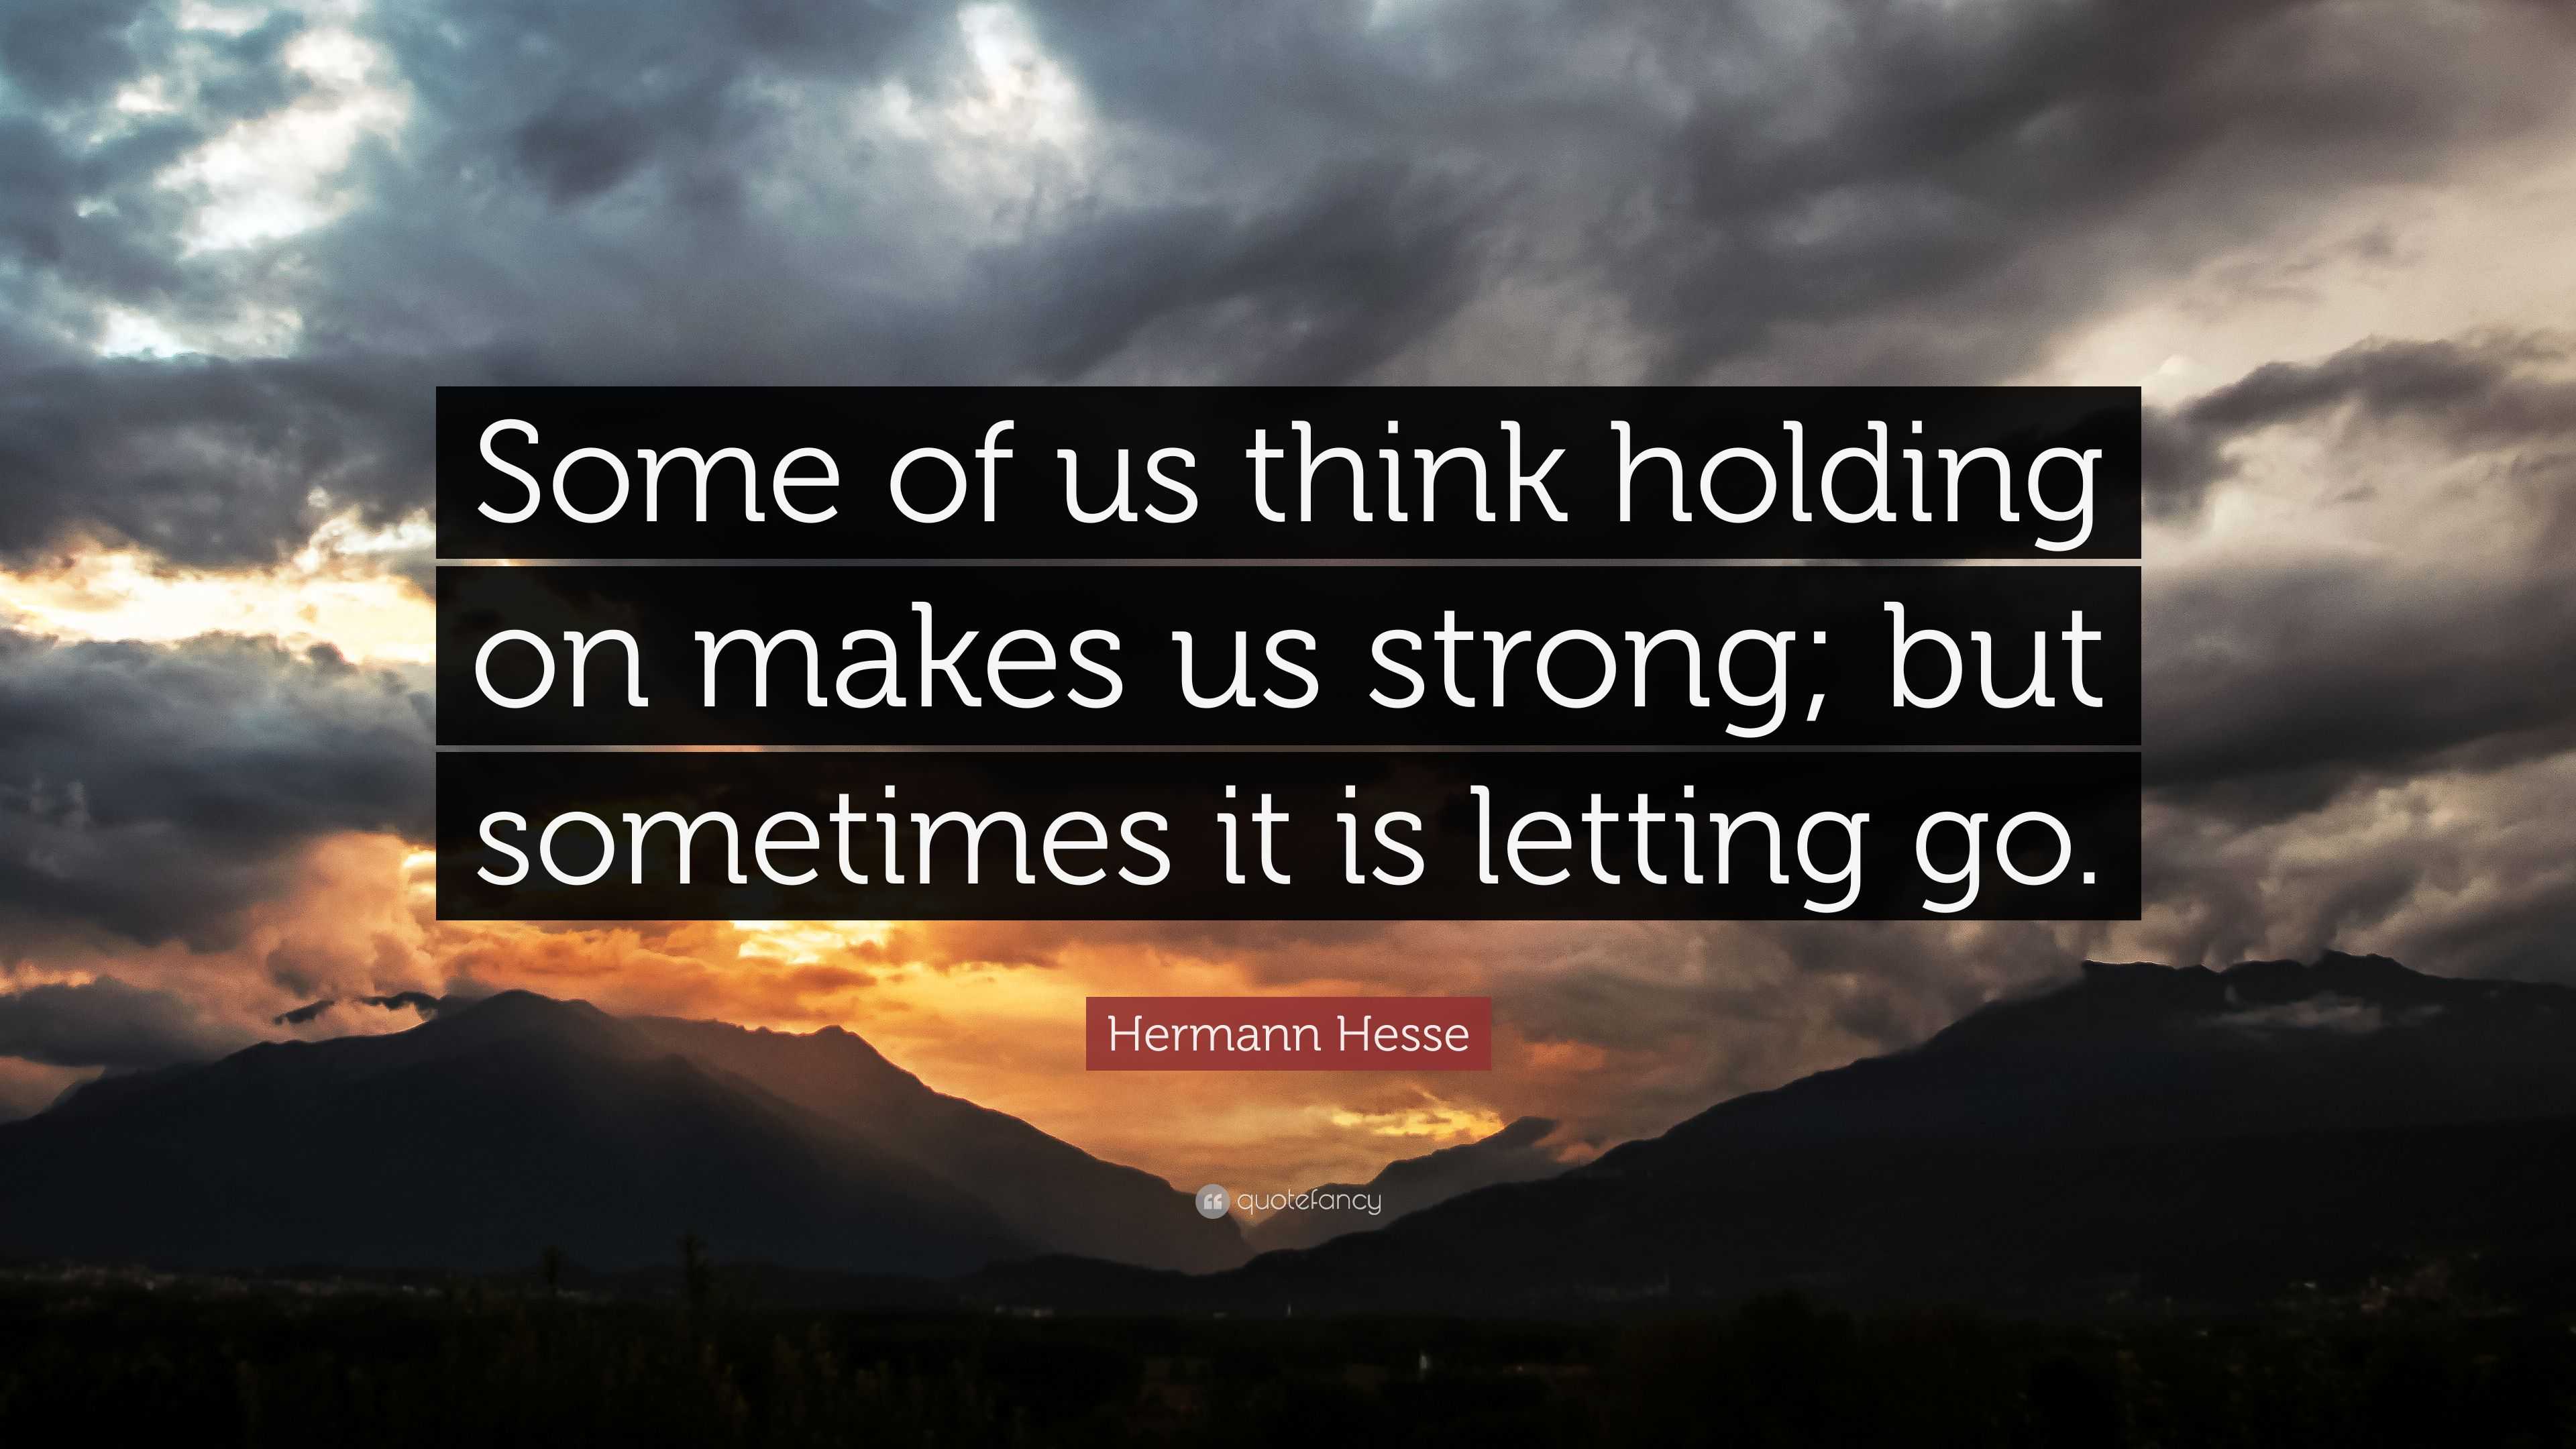 Hermann Hesse Quote: “Some of us think holding on makes us strong; but